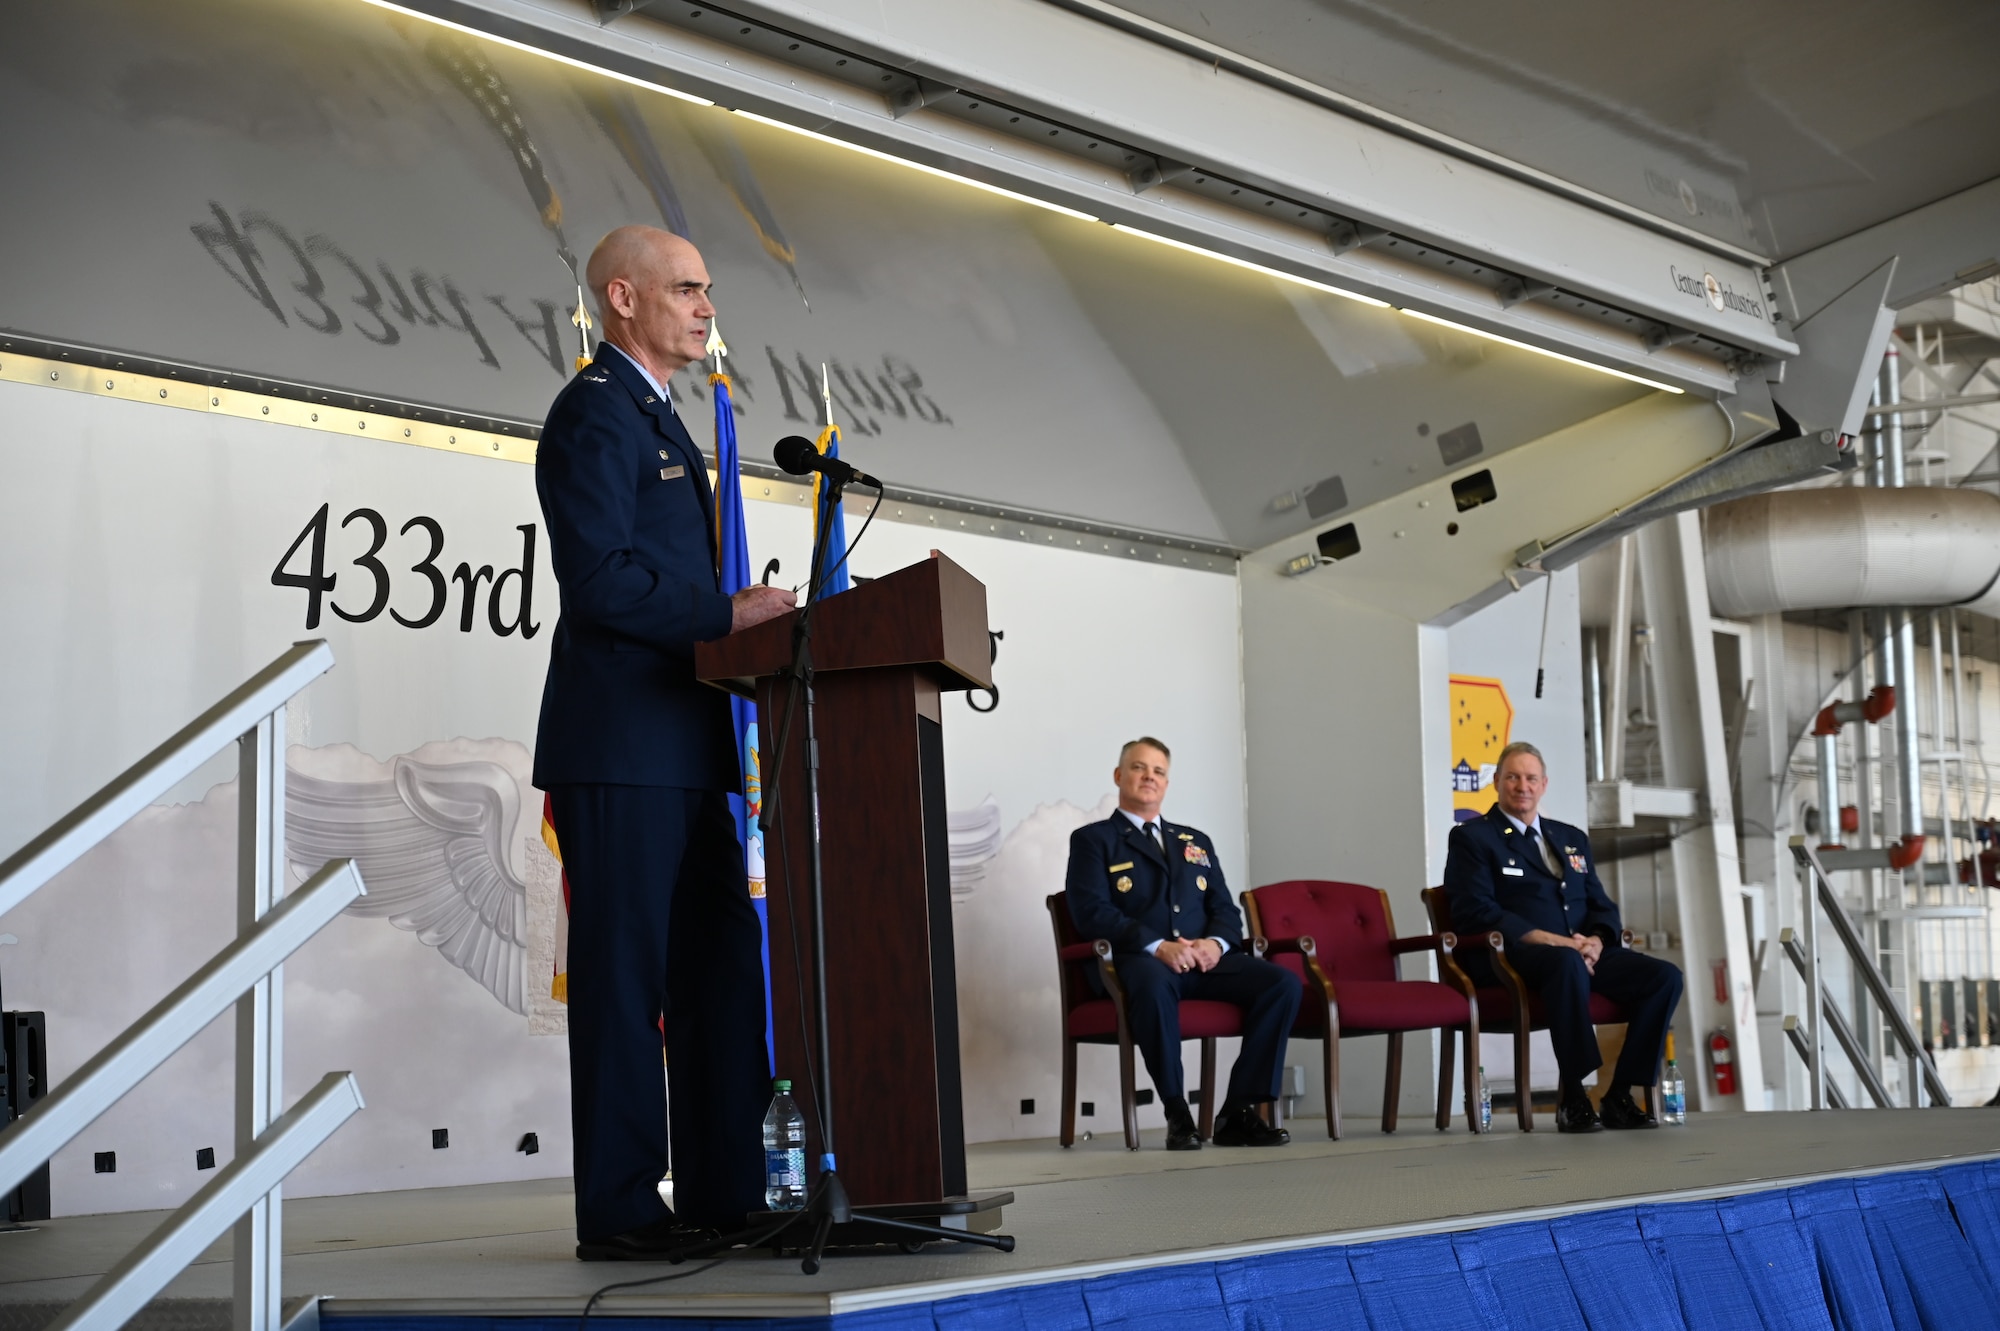 Col. William Gutermuth, 433rd Airlift Wing commander, delivers remarks during a change of command ceremony March 5, 2023, at Joint Base San Antonio-Lackland, Texas. Gutermuth received his commission through the Air Force Officer Training School program in 1992 and directly entered into the Air Force Reserve following undergraduate pilot training at Laughlin Air Force Base, Texas. (U.S. Air Force photo by Master Sgt. Samantha Mathison)